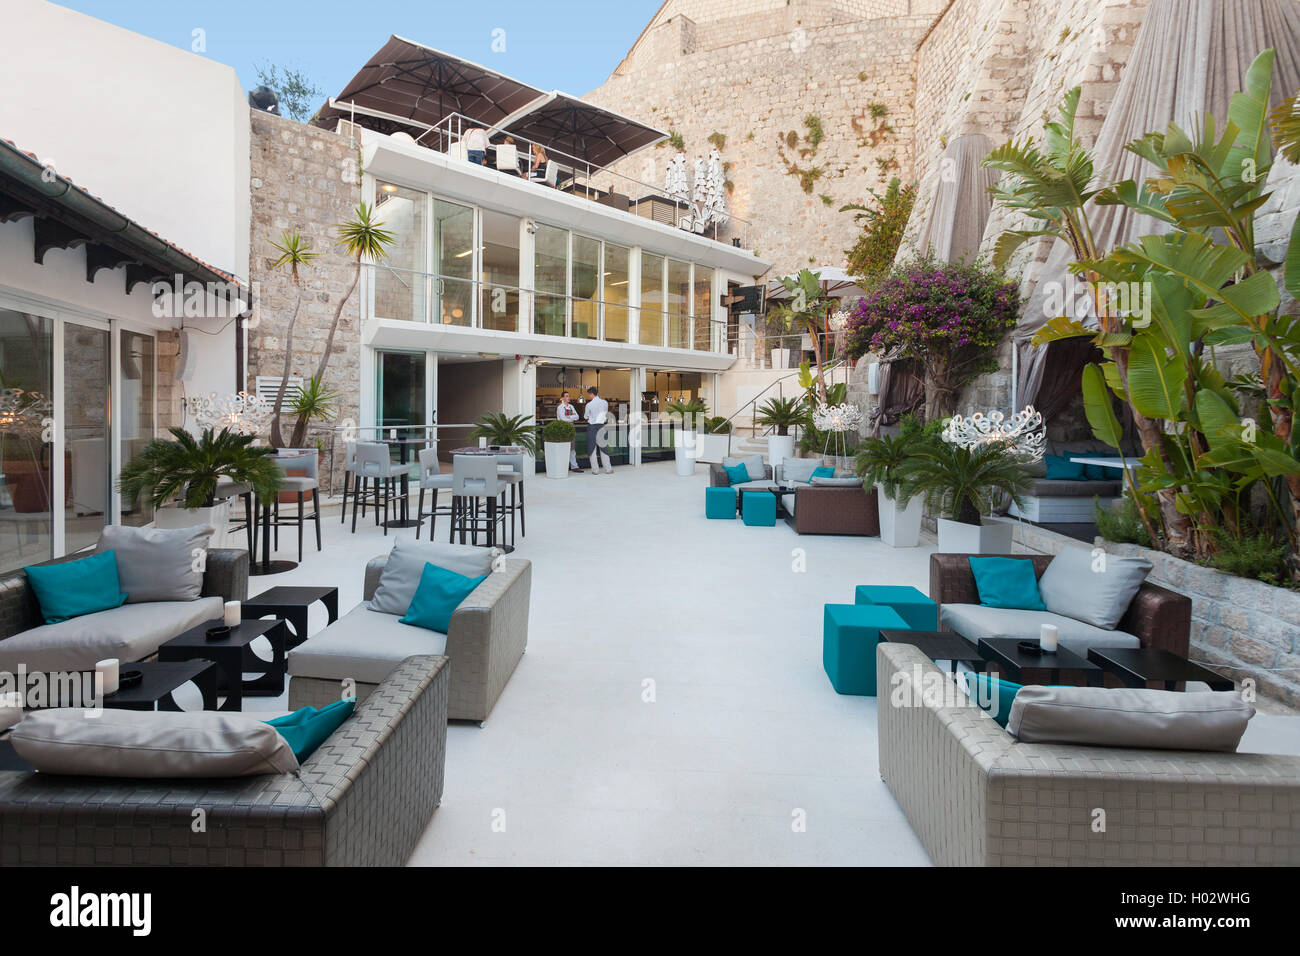 DUBROVNIK, CROATIA - MAY 28, 2014: Terrace of the Restaurant 360 degrees on old wall. Stock Photo